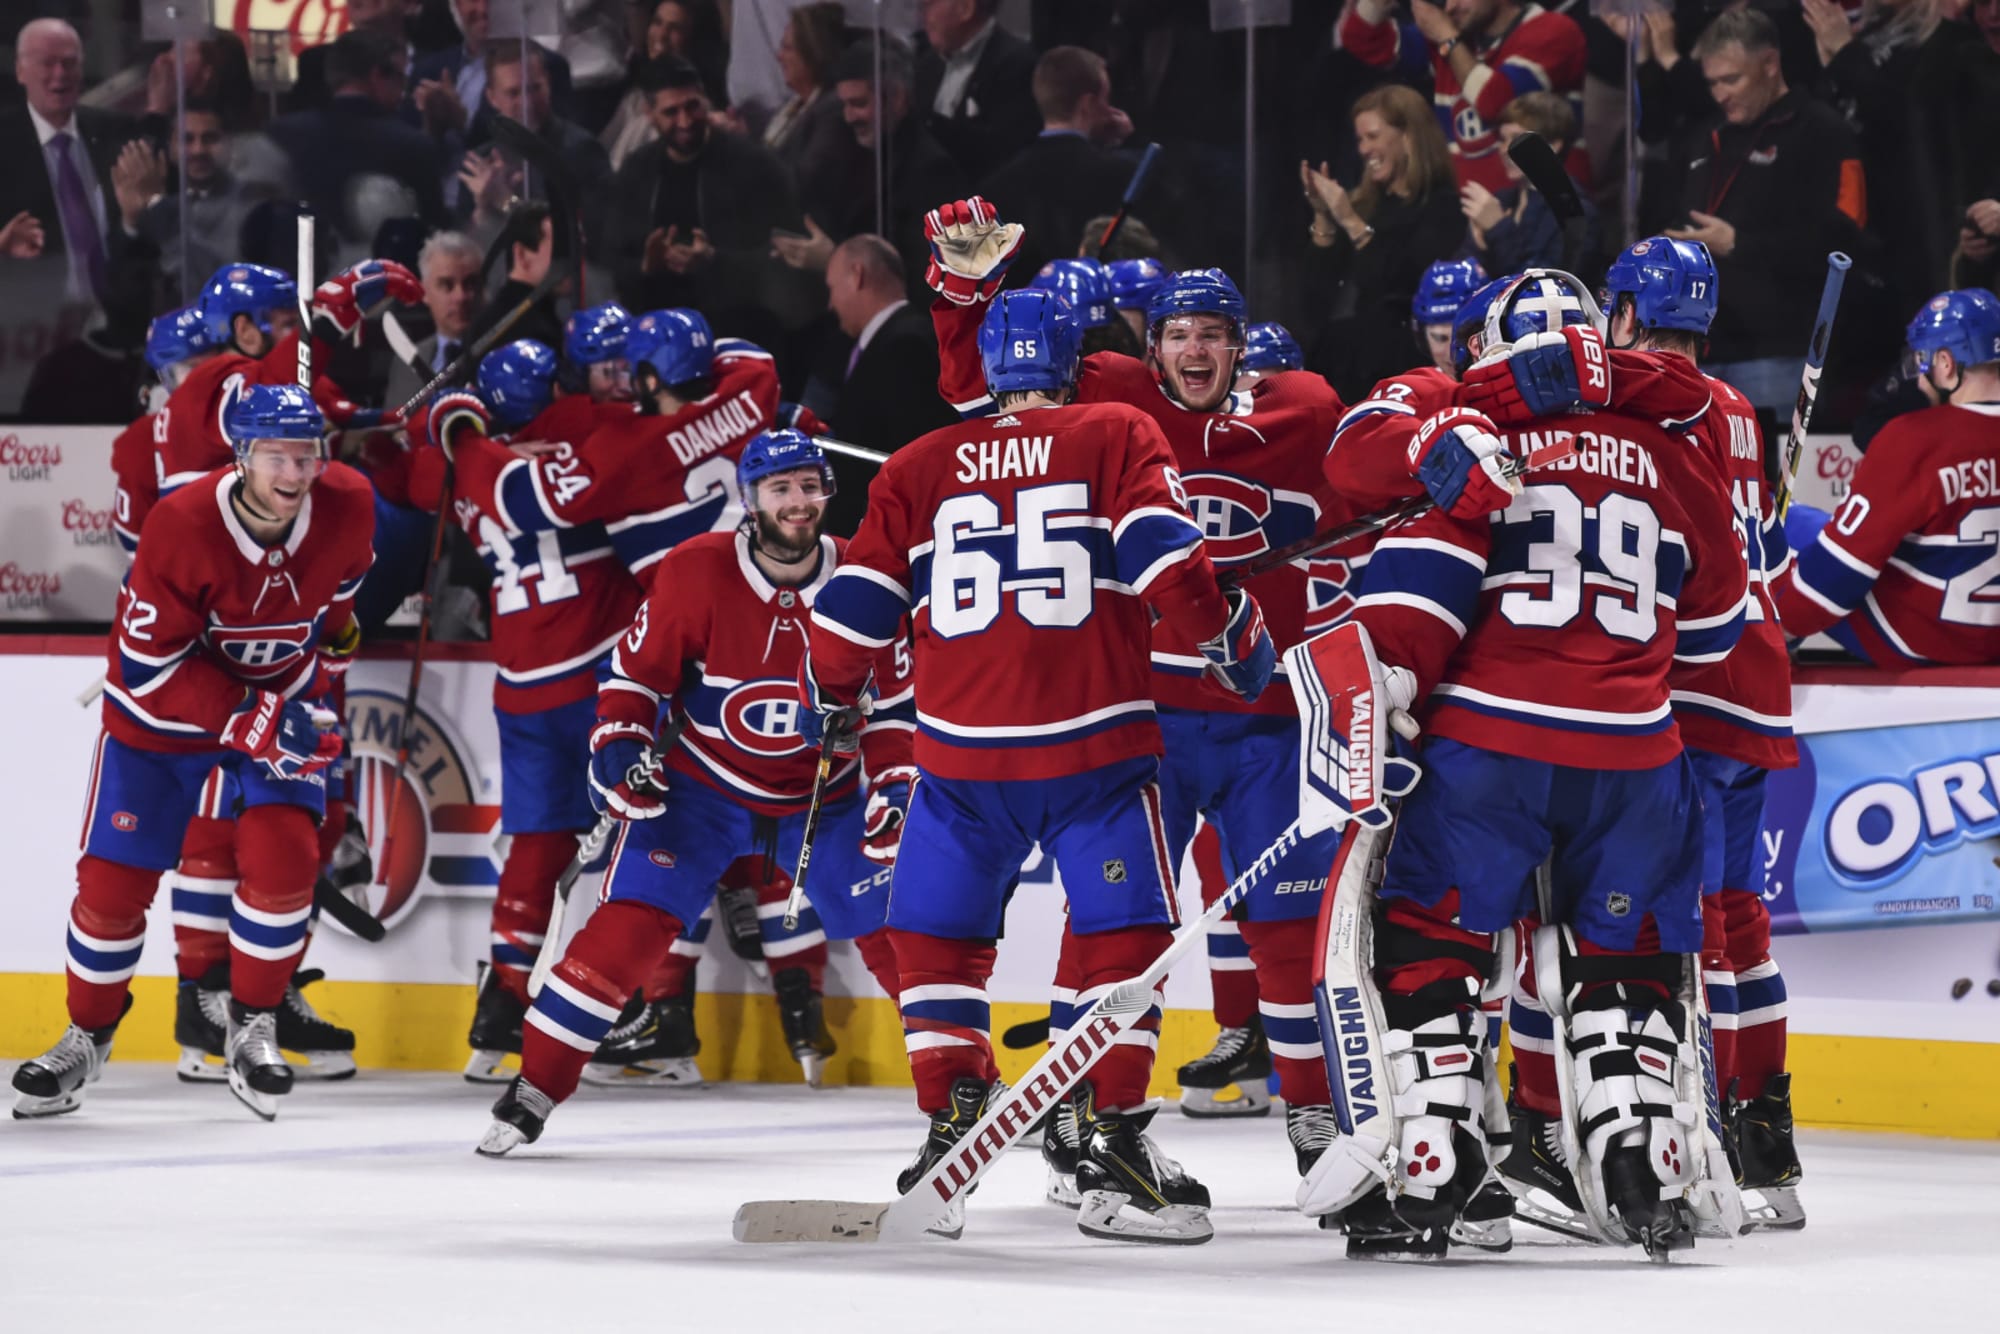 Montreal Canadiens The most frustrating part of not being in the playoffs